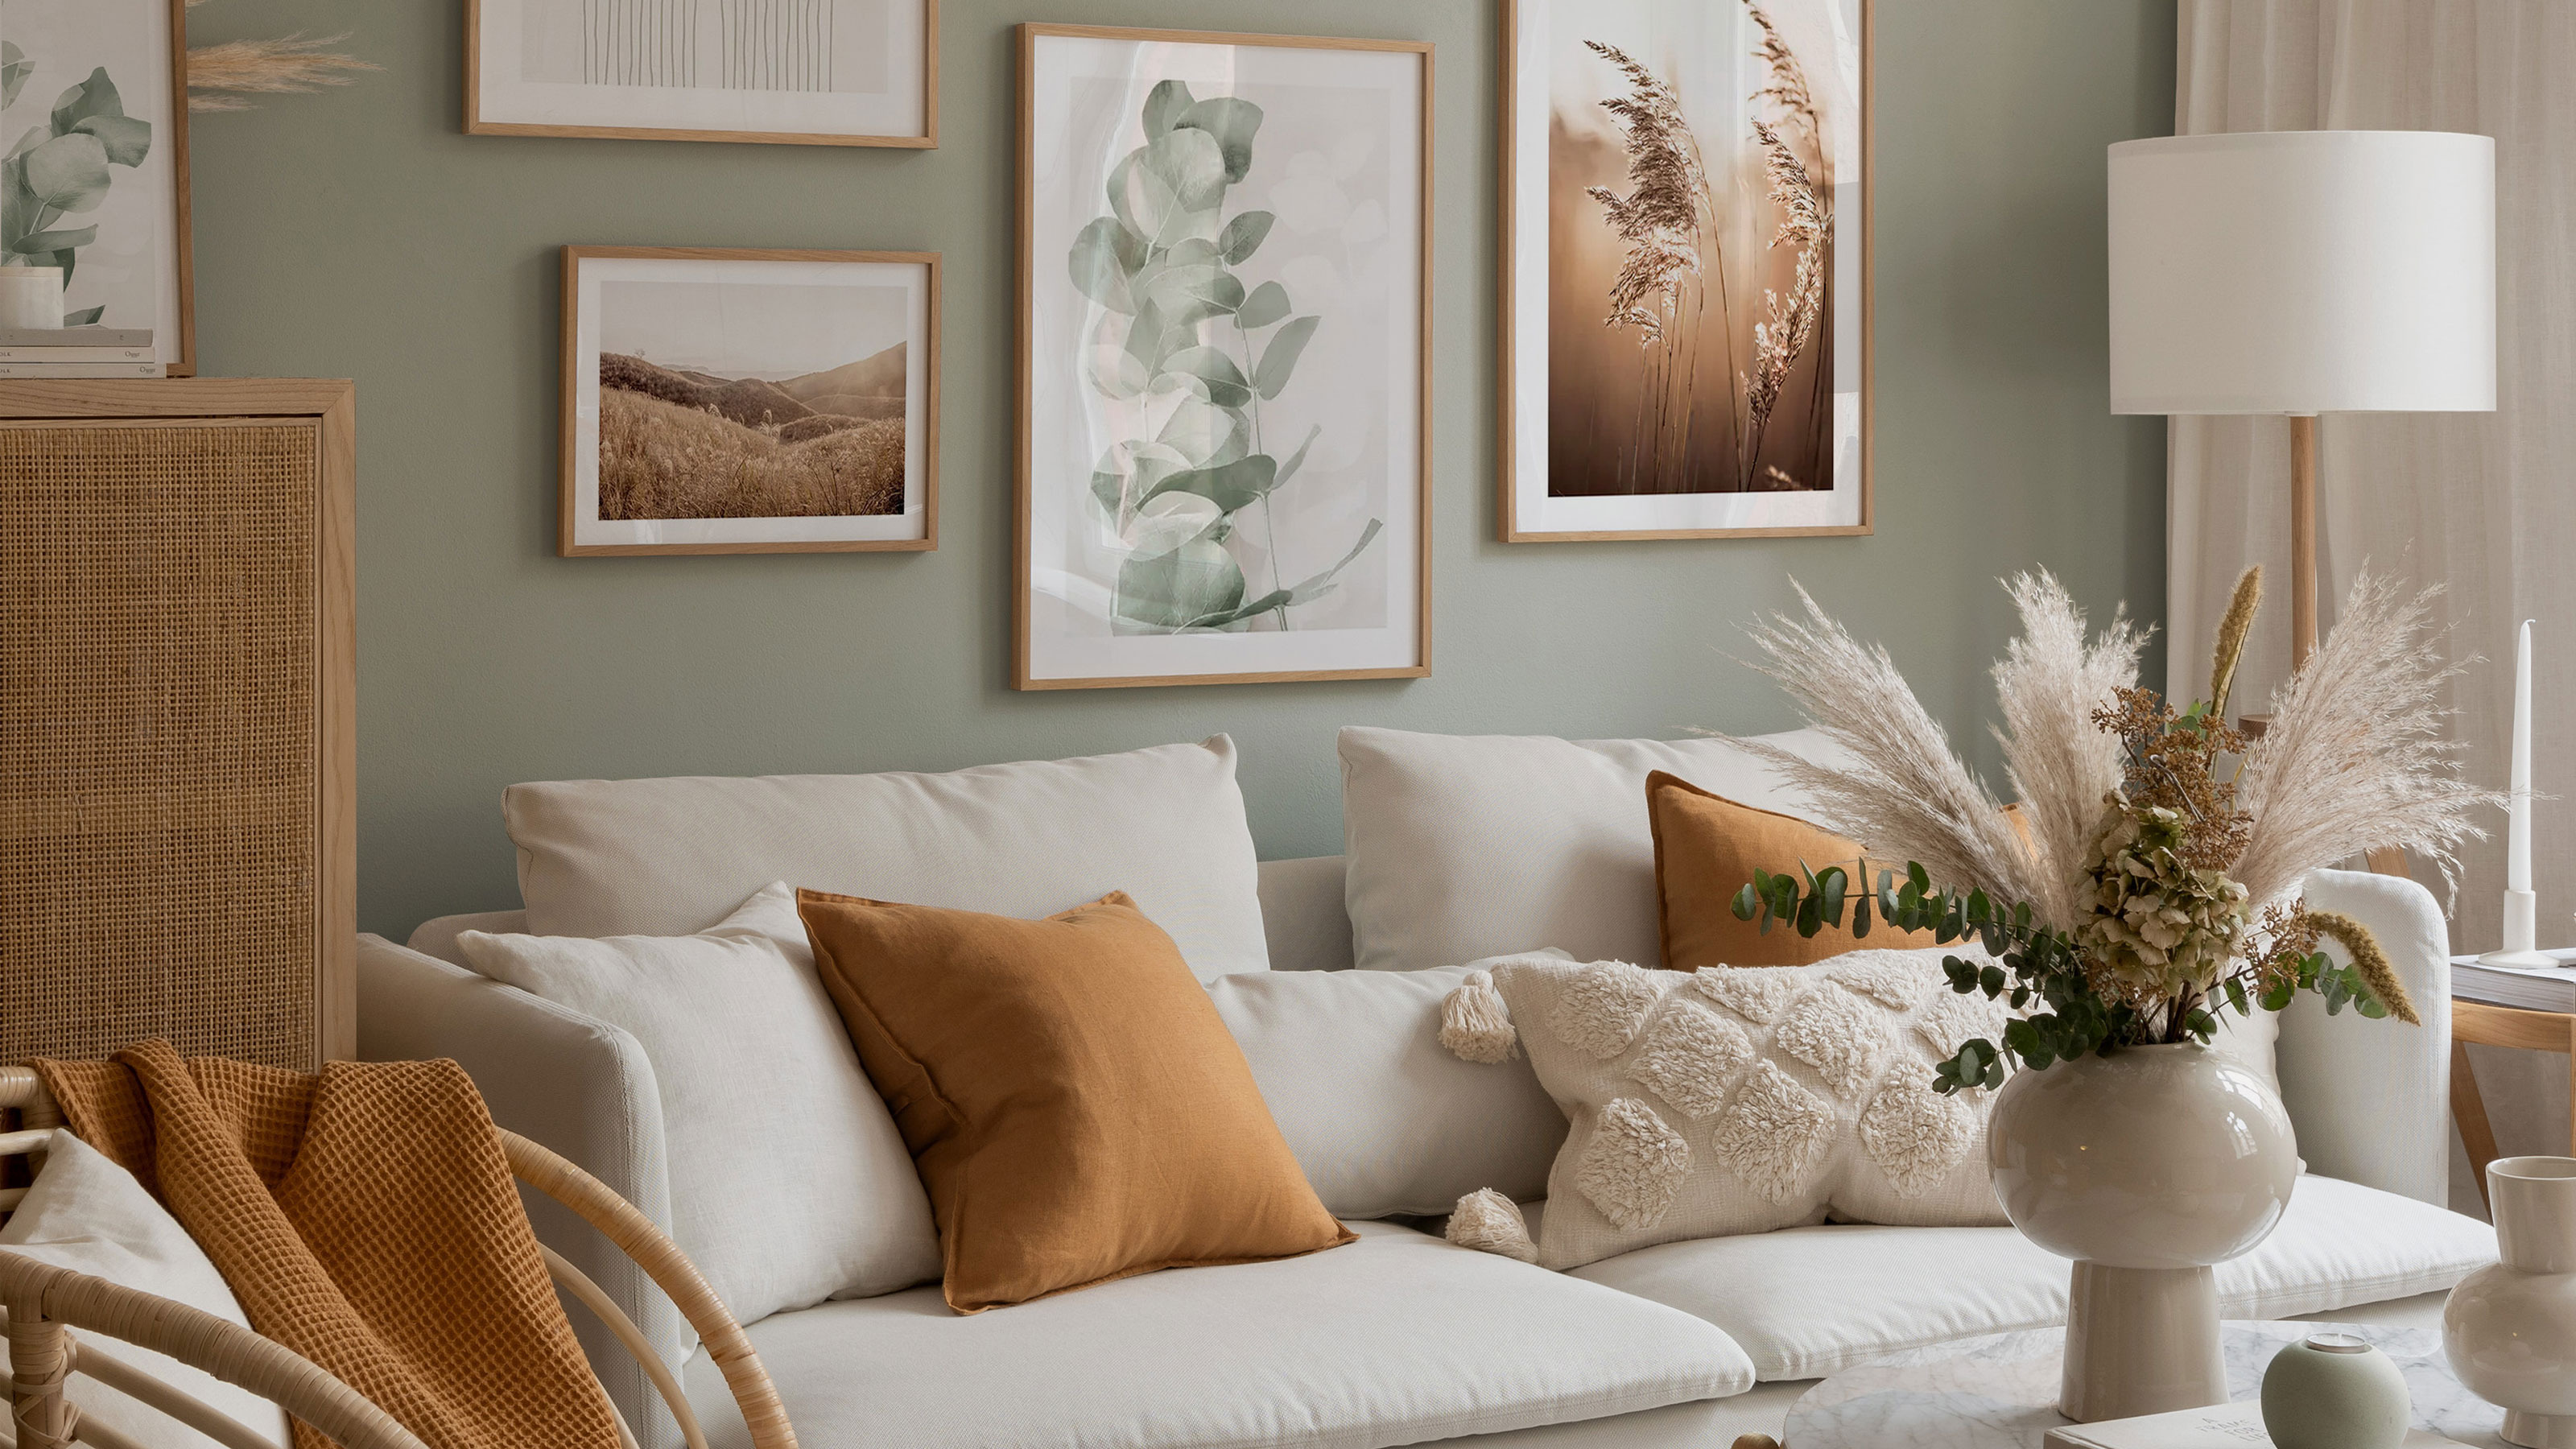 7 dated decorating trends to avoid in 2022 (and what to try instead) | Real  Homes